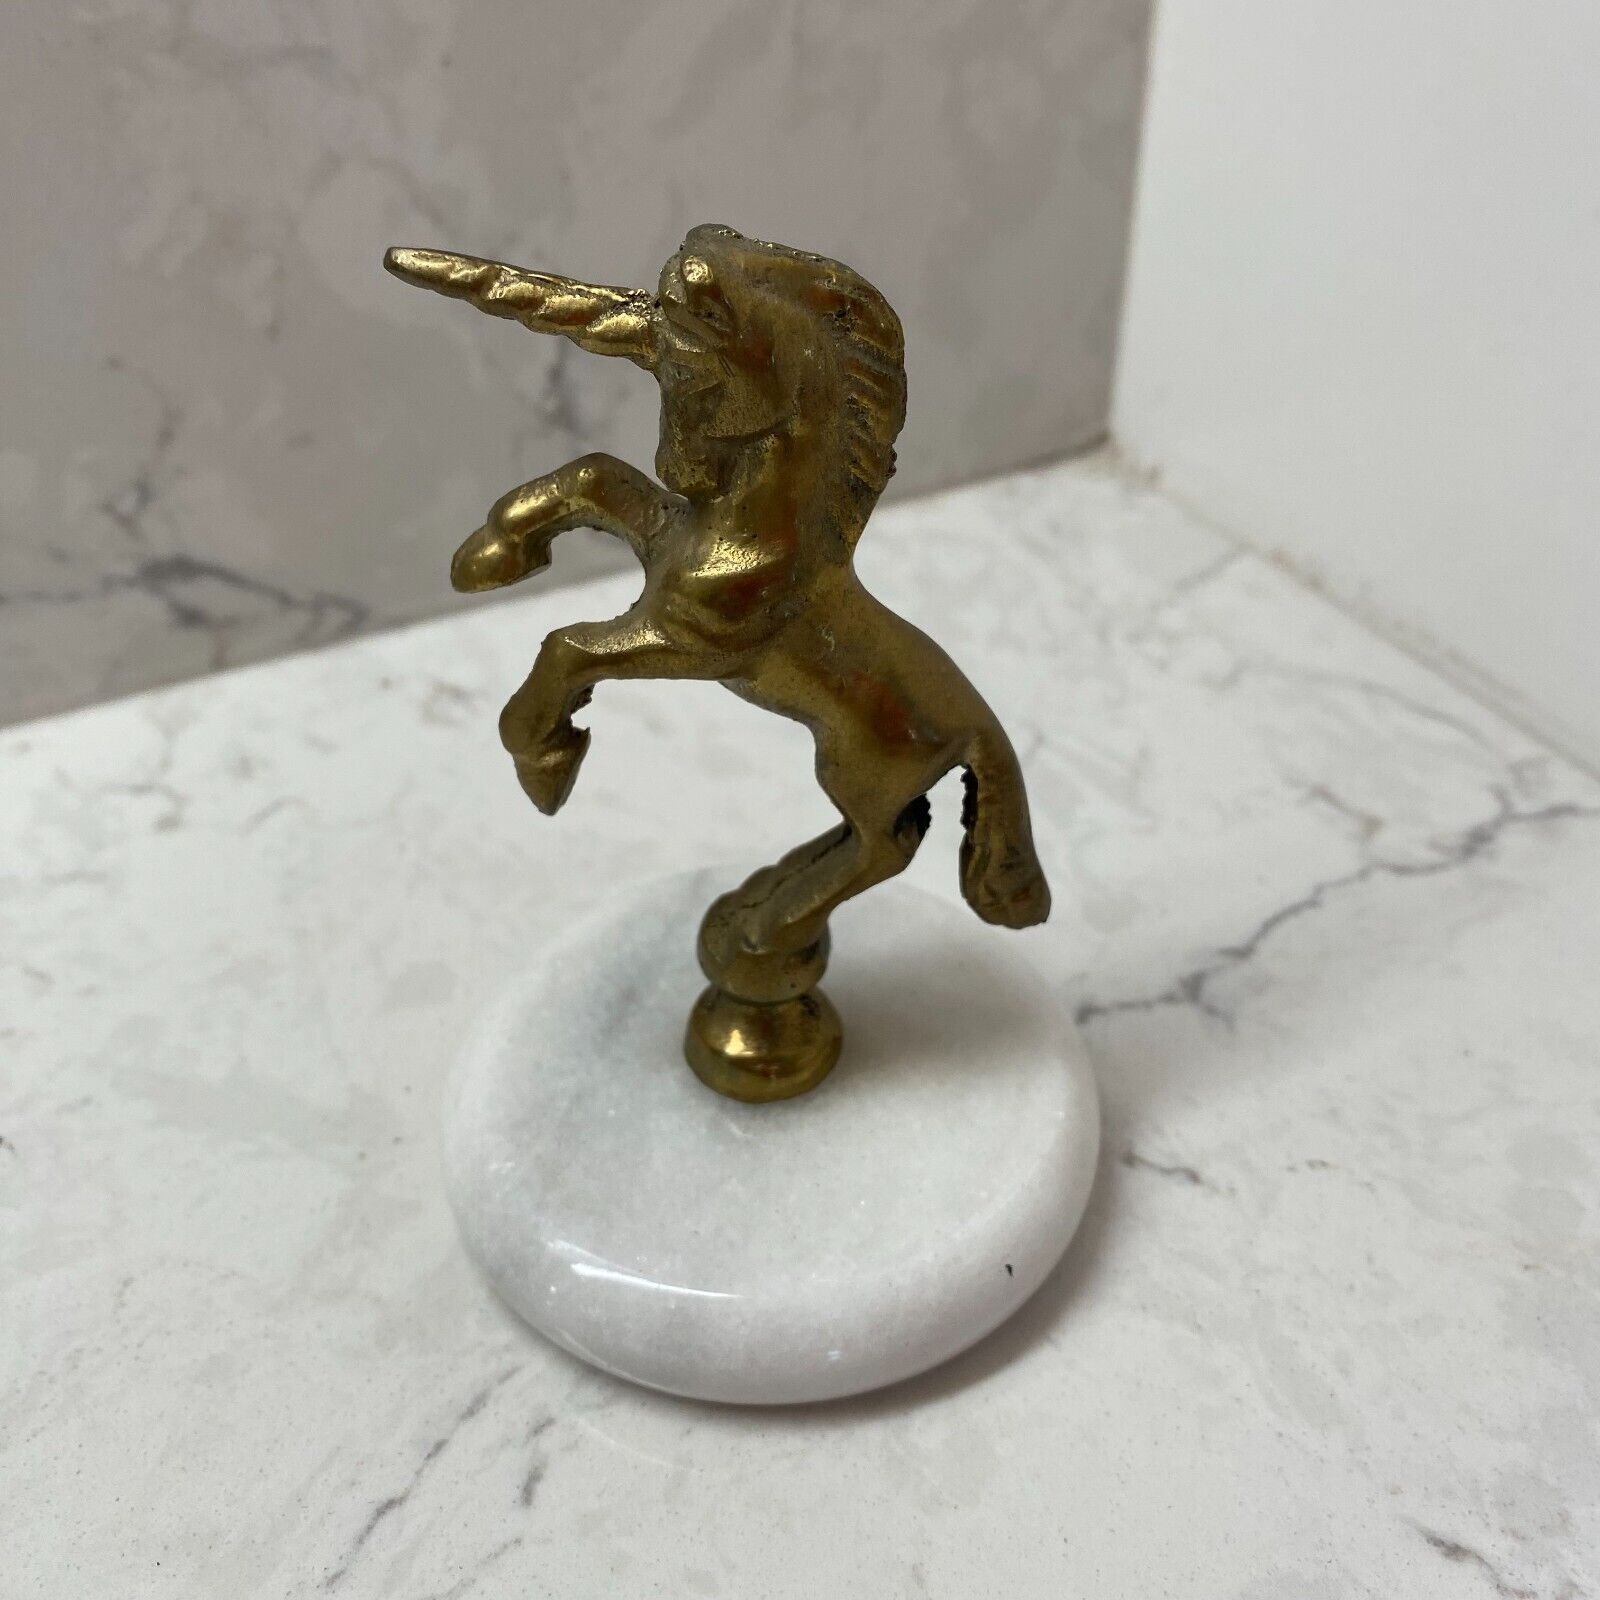 Vintage Home Decorative Brass Fantasy Rearing Unicorn Figurine with Marble Base